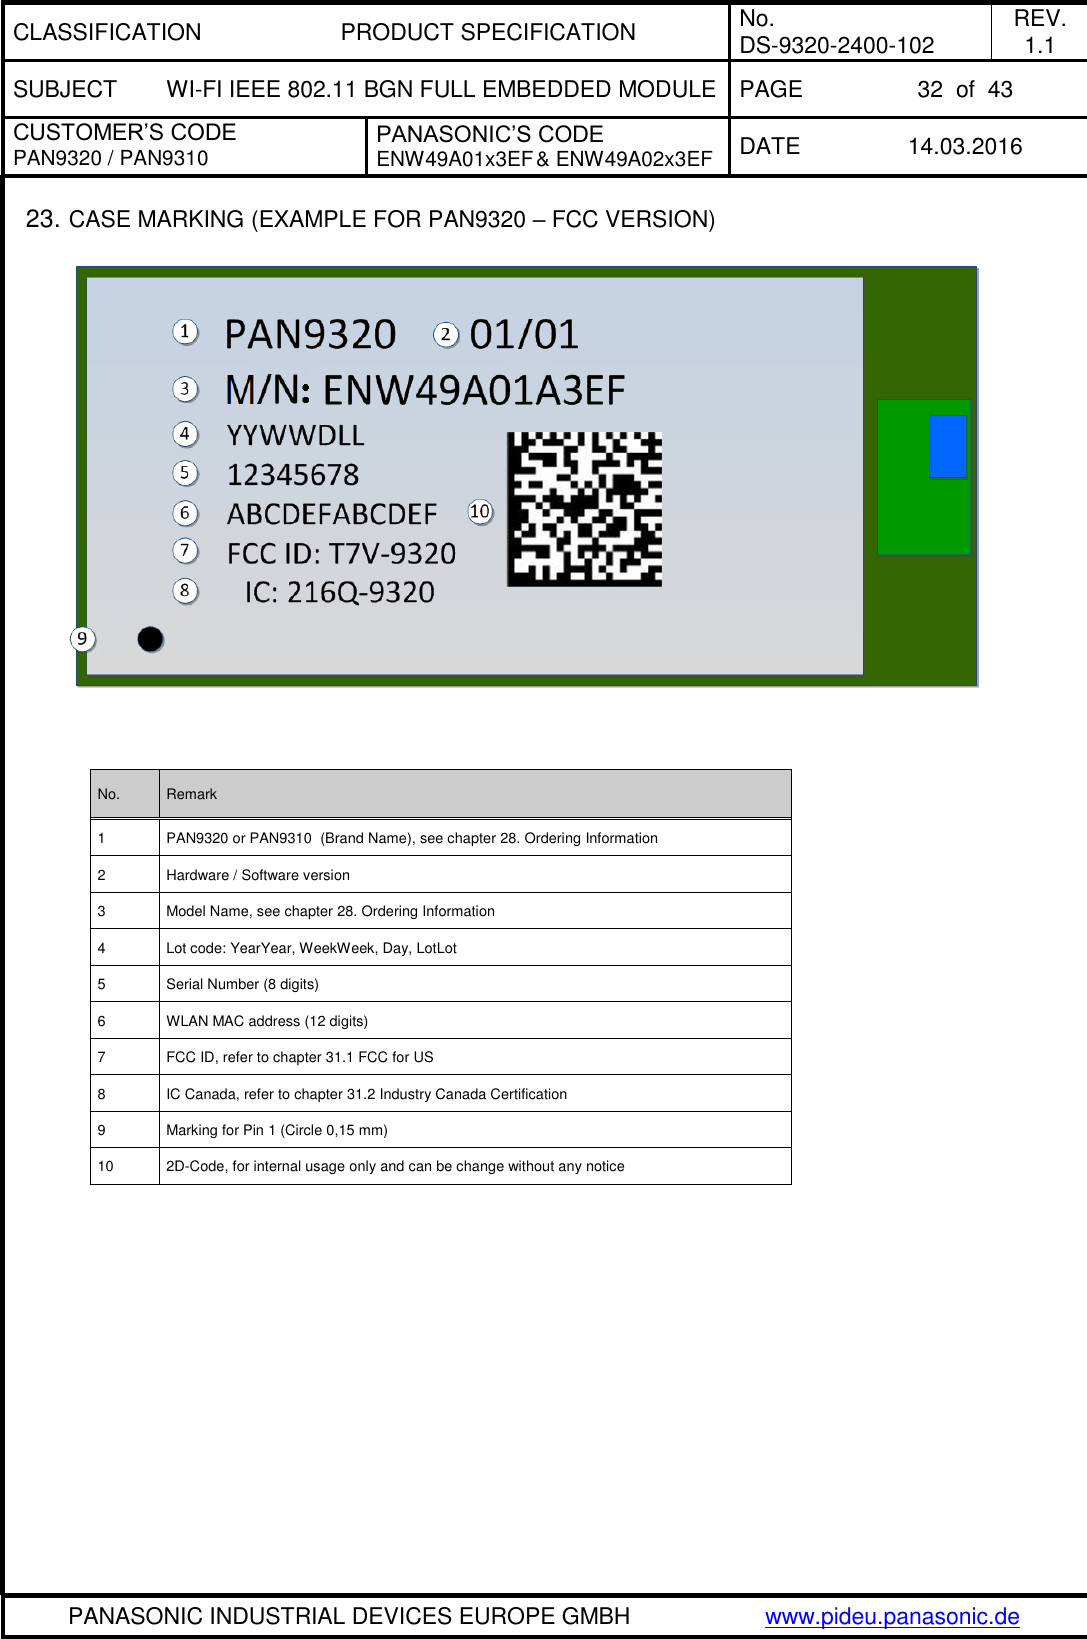 CLASSIFICATION PRODUCT SPECIFICATION No. DS-9320-2400-102 REV. 1.1 SUBJECT WI-FI IEEE 802.11 BGN FULL EMBEDDED MODULE PAGE 32  of  43 CUSTOMER’S CODE PAN9320 / PAN9310 PANASONIC’S CODE ENW49A01x3EF &amp; ENW49A02x3EF DATE 14.03.2016   PANASONIC INDUSTRIAL DEVICES EUROPE GMBH www.pideu.panasonic.de  23. CASE MARKING (EXAMPLE FOR PAN9320 – FCC VERSION)          No. Remark 1 PAN9320 or PAN9310  (Brand Name), see chapter 28. Ordering Information 2 Hardware / Software version 3 Model Name, see chapter 28. Ordering Information 4 Lot code: YearYear, WeekWeek, Day, LotLot 5 Serial Number (8 digits) 6 WLAN MAC address (12 digits) 7 FCC ID, refer to chapter 31.1 FCC for US 8 IC Canada, refer to chapter 31.2 Industry Canada Certification 9 Marking for Pin 1 (Circle 0,15 mm) 10 2D-Code, for internal usage only and can be change without any notice     